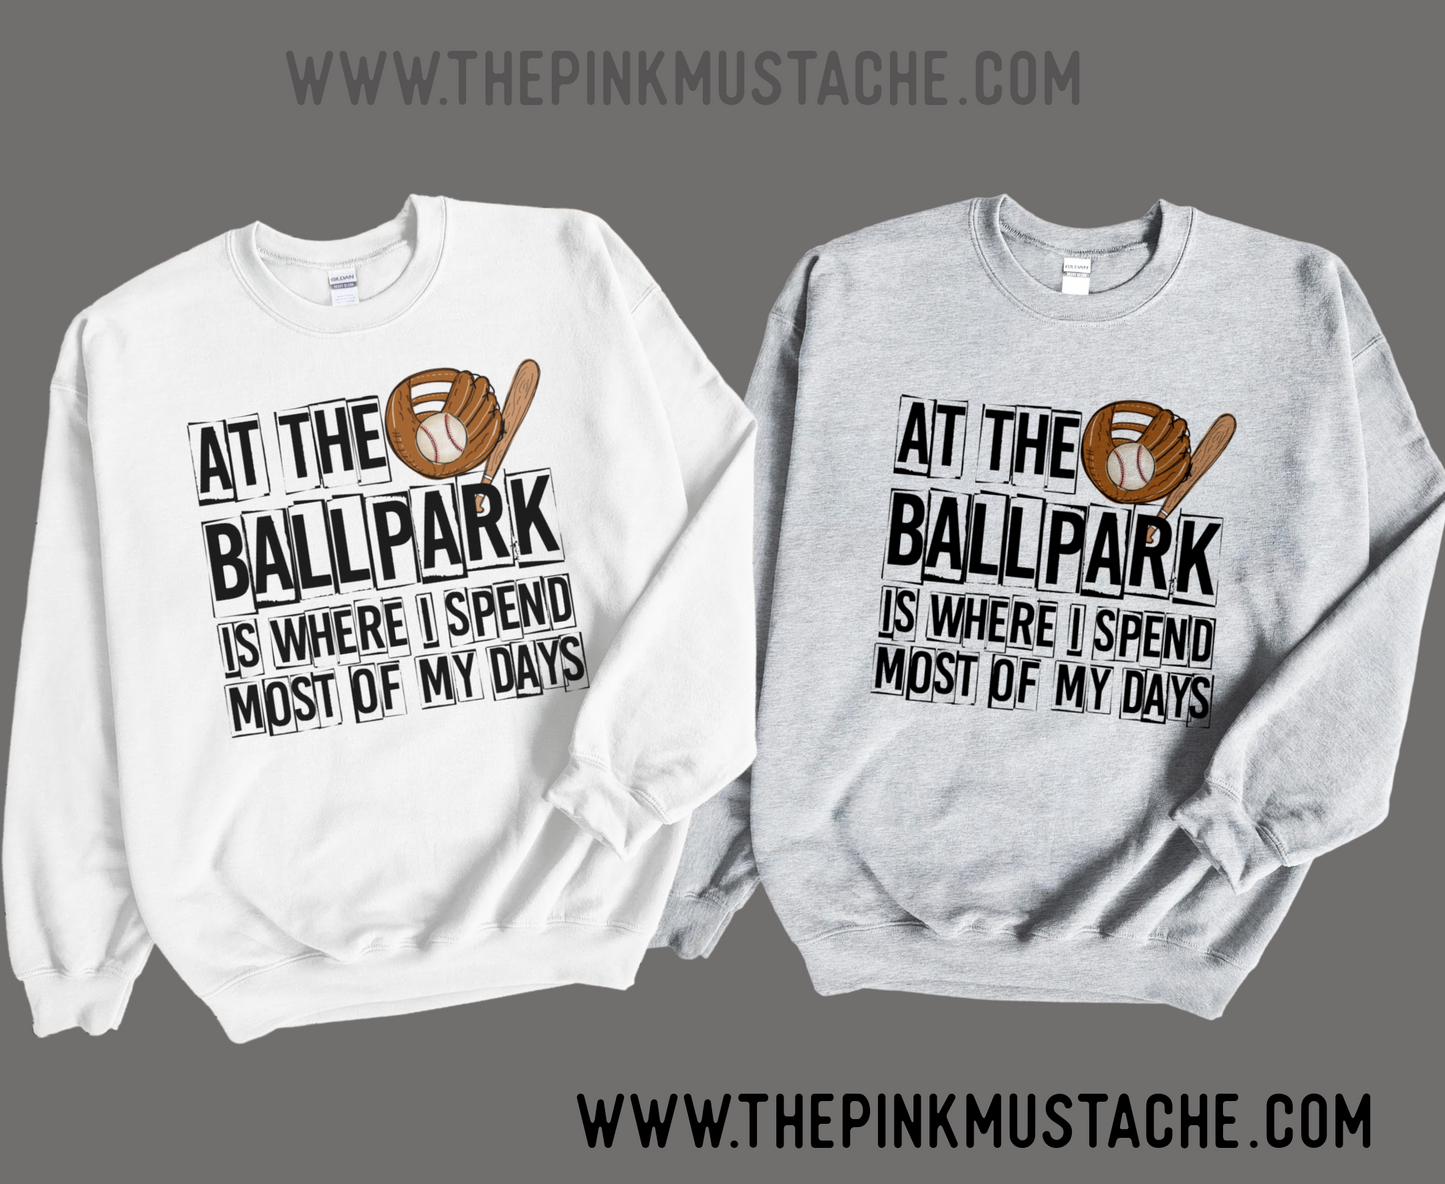 At The Ballpark Is Where I Spend Most of My Days Unisex Baseball Sweatshirts   Baseball Toddler, Youth, and Adult Soft Style Sweater